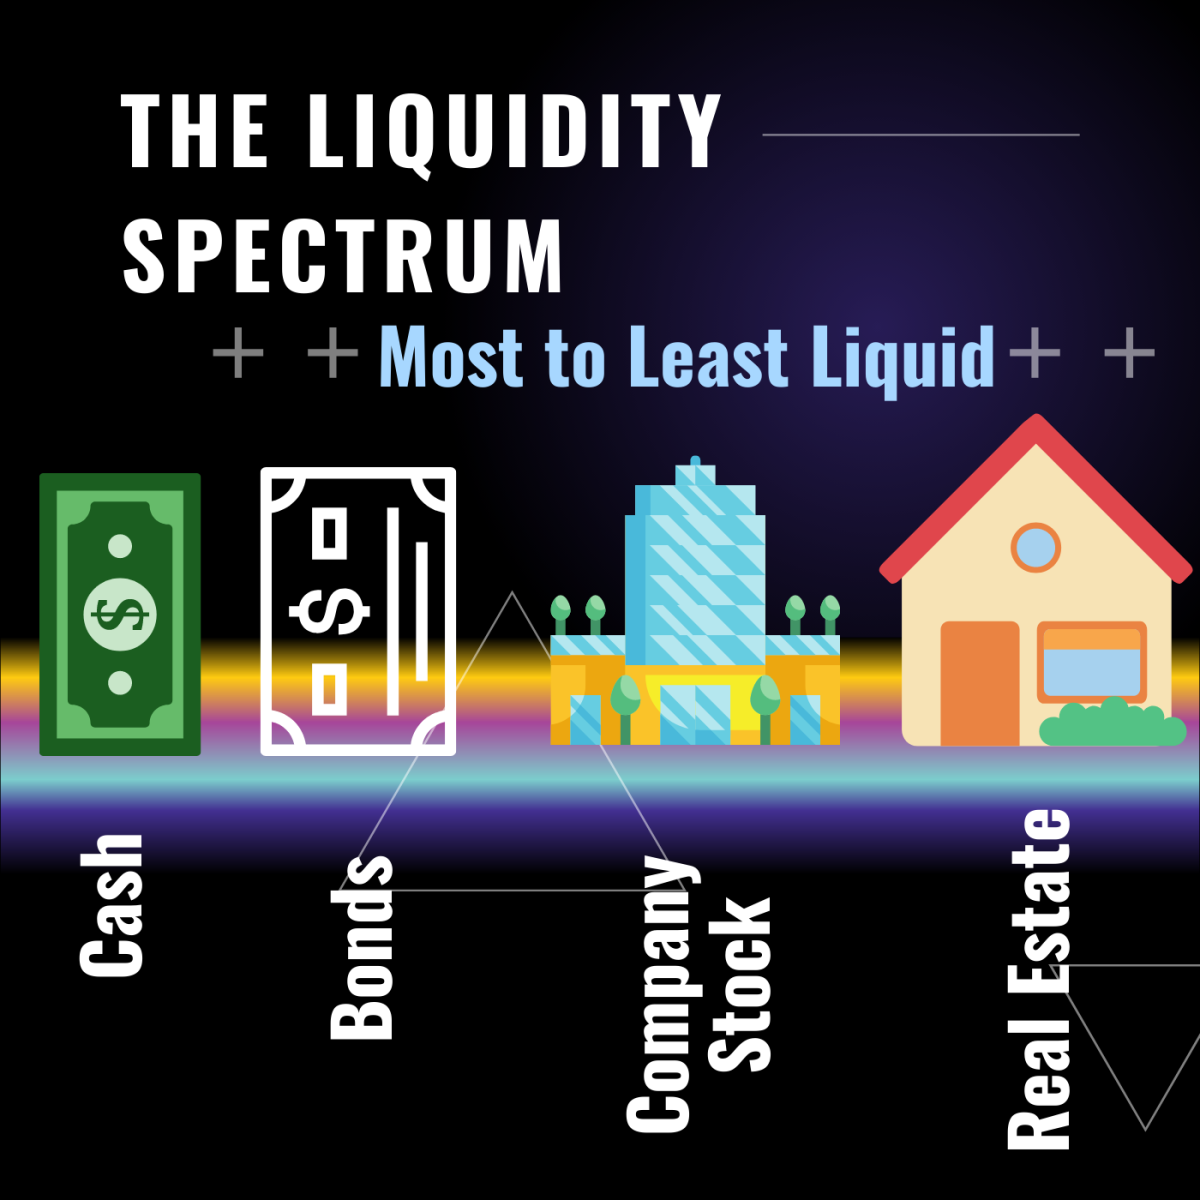 A few examples of assets on the spectrum of liquidity. Cash is the most liquid while tangible assets, like real estate, are considered illiquid.